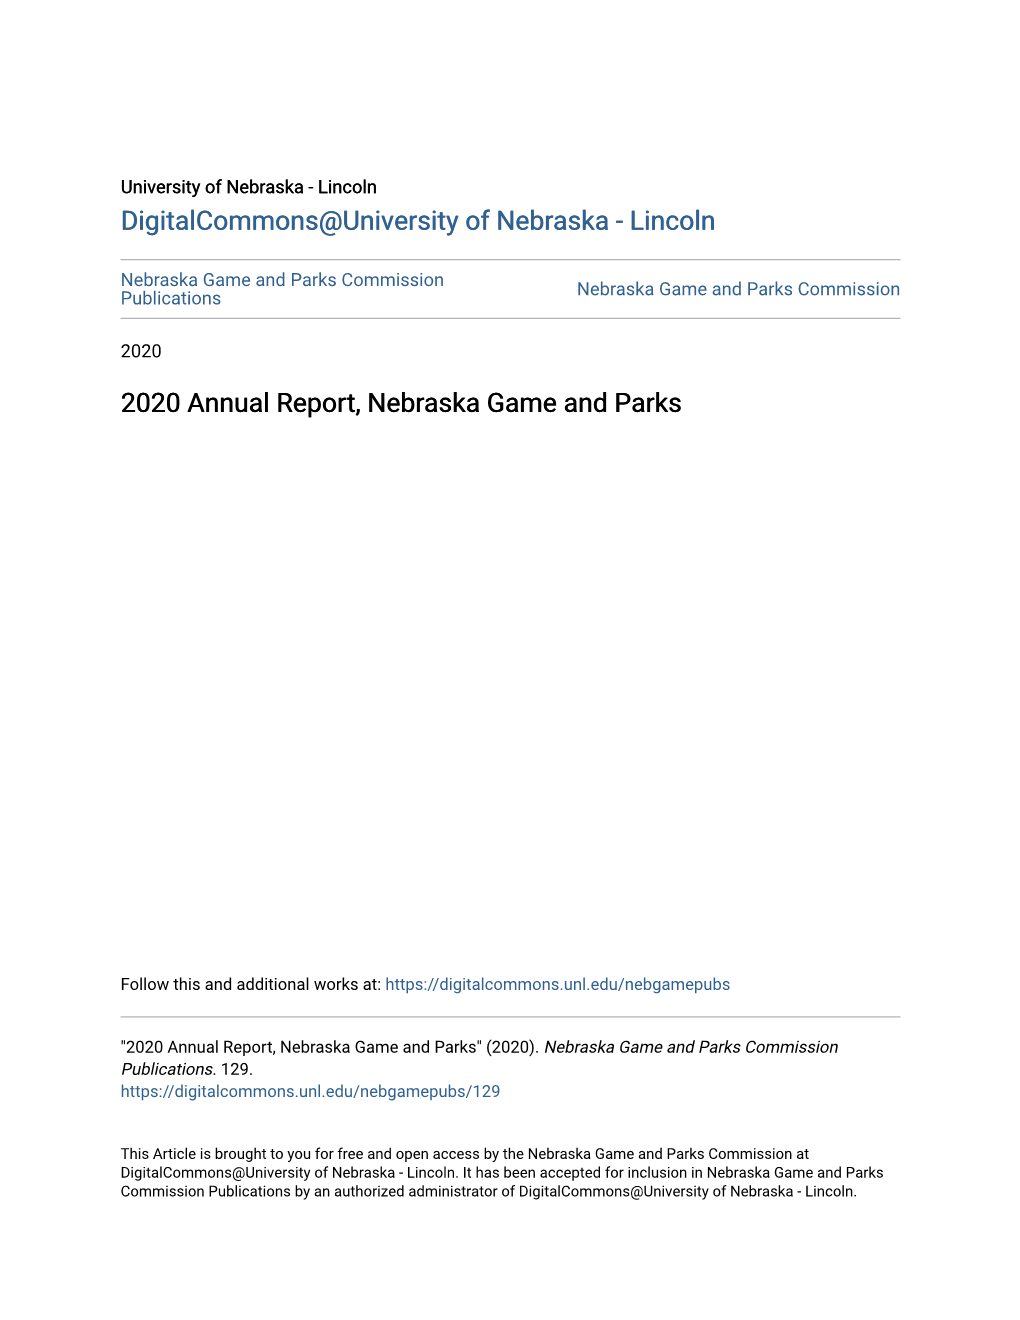 2020 Annual Report, Nebraska Game and Parks